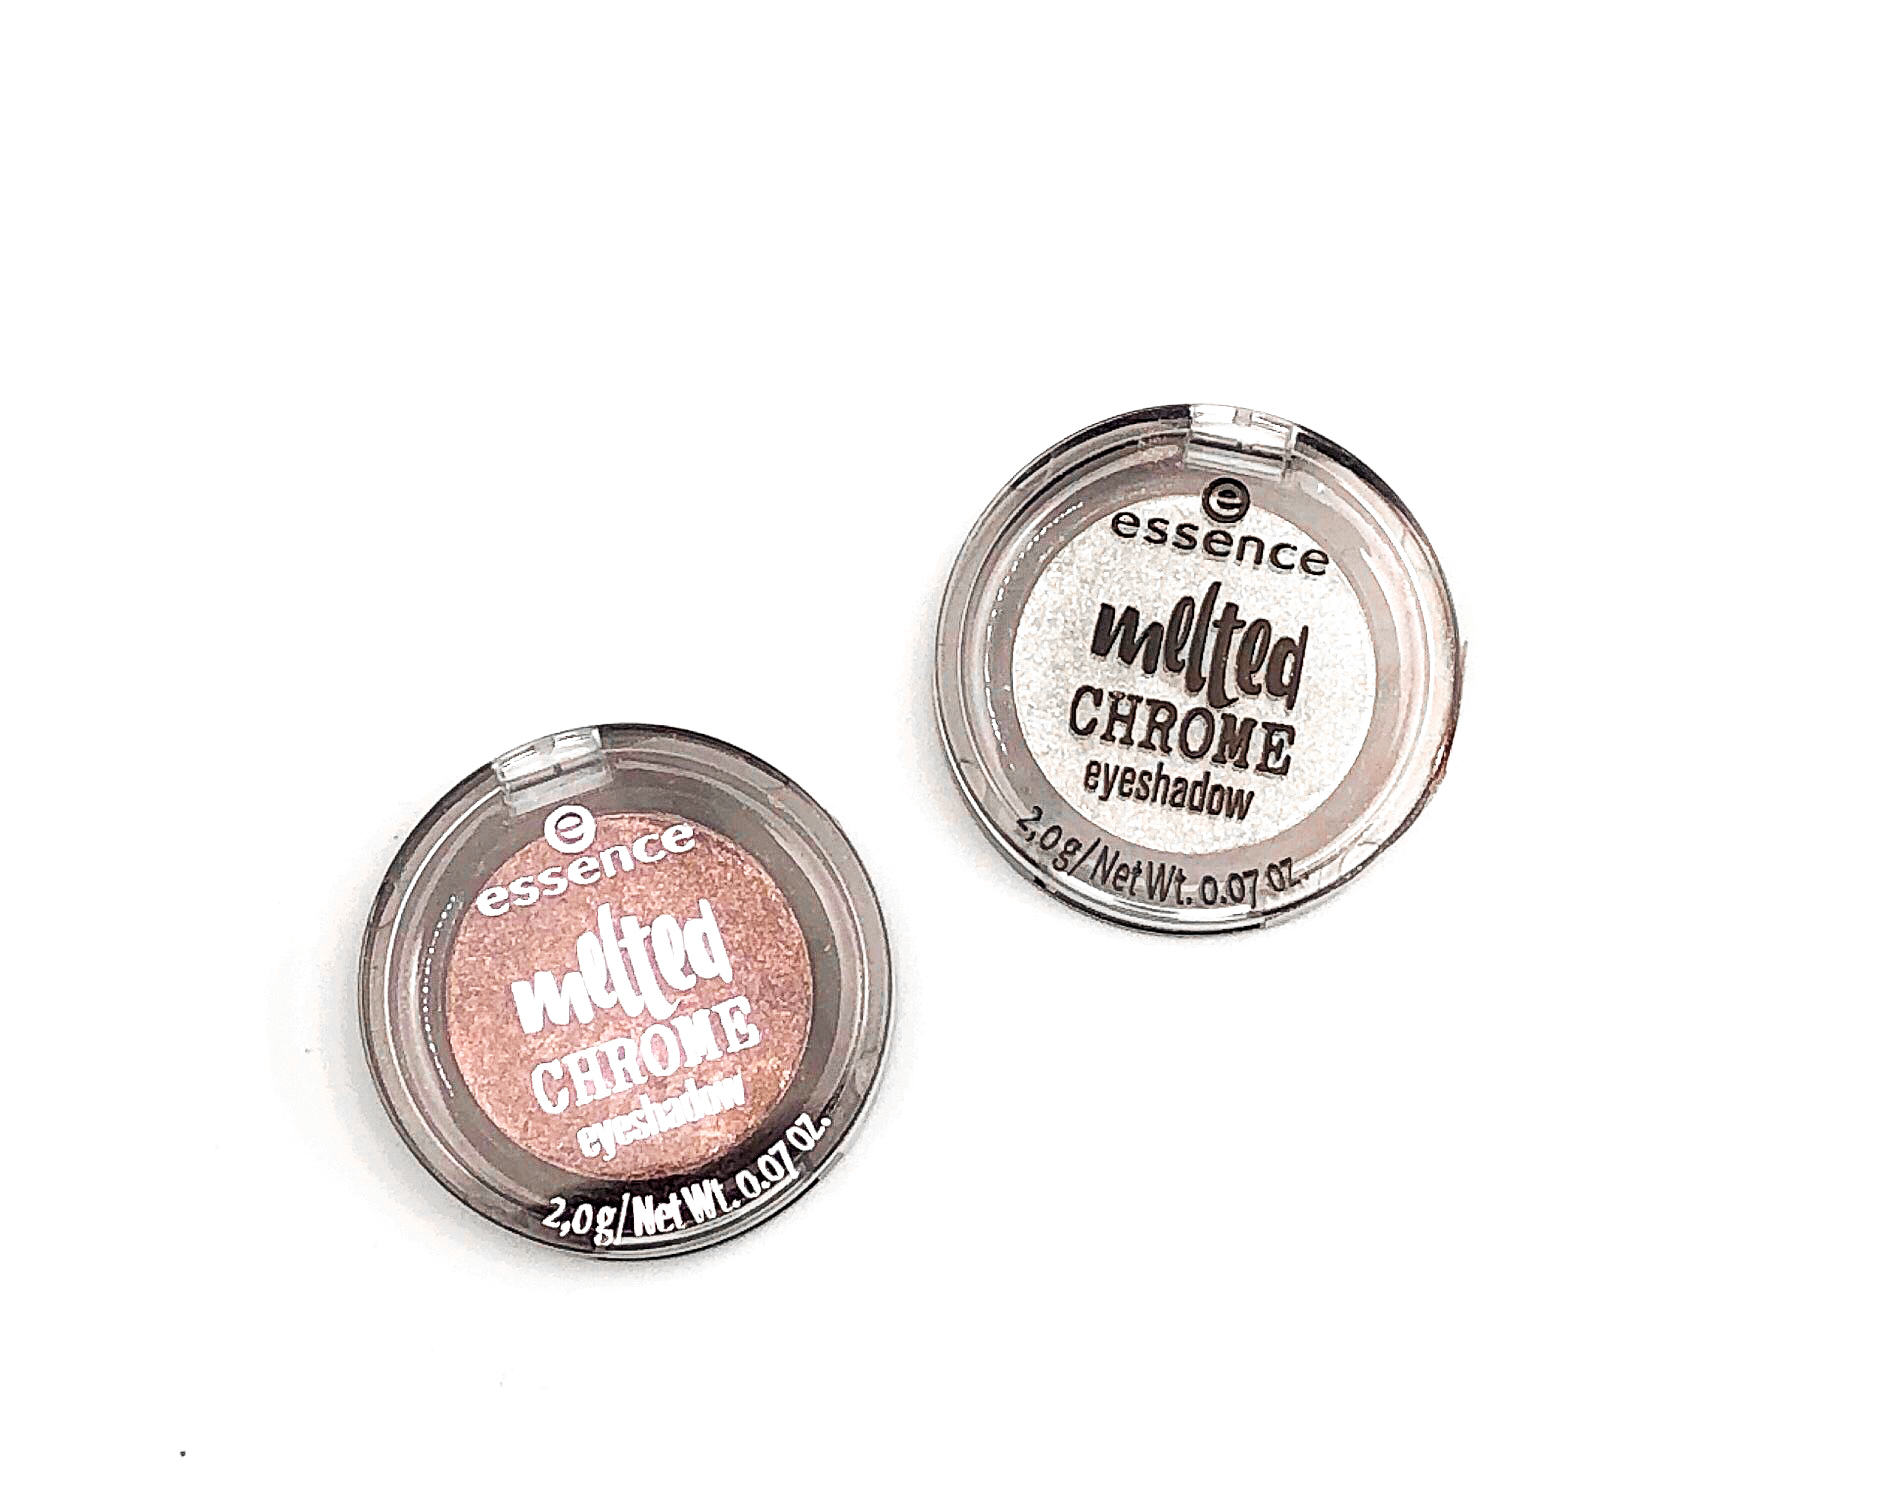 Review Essence Lead Me, Zink About You Melted Chrome Eyeshadow